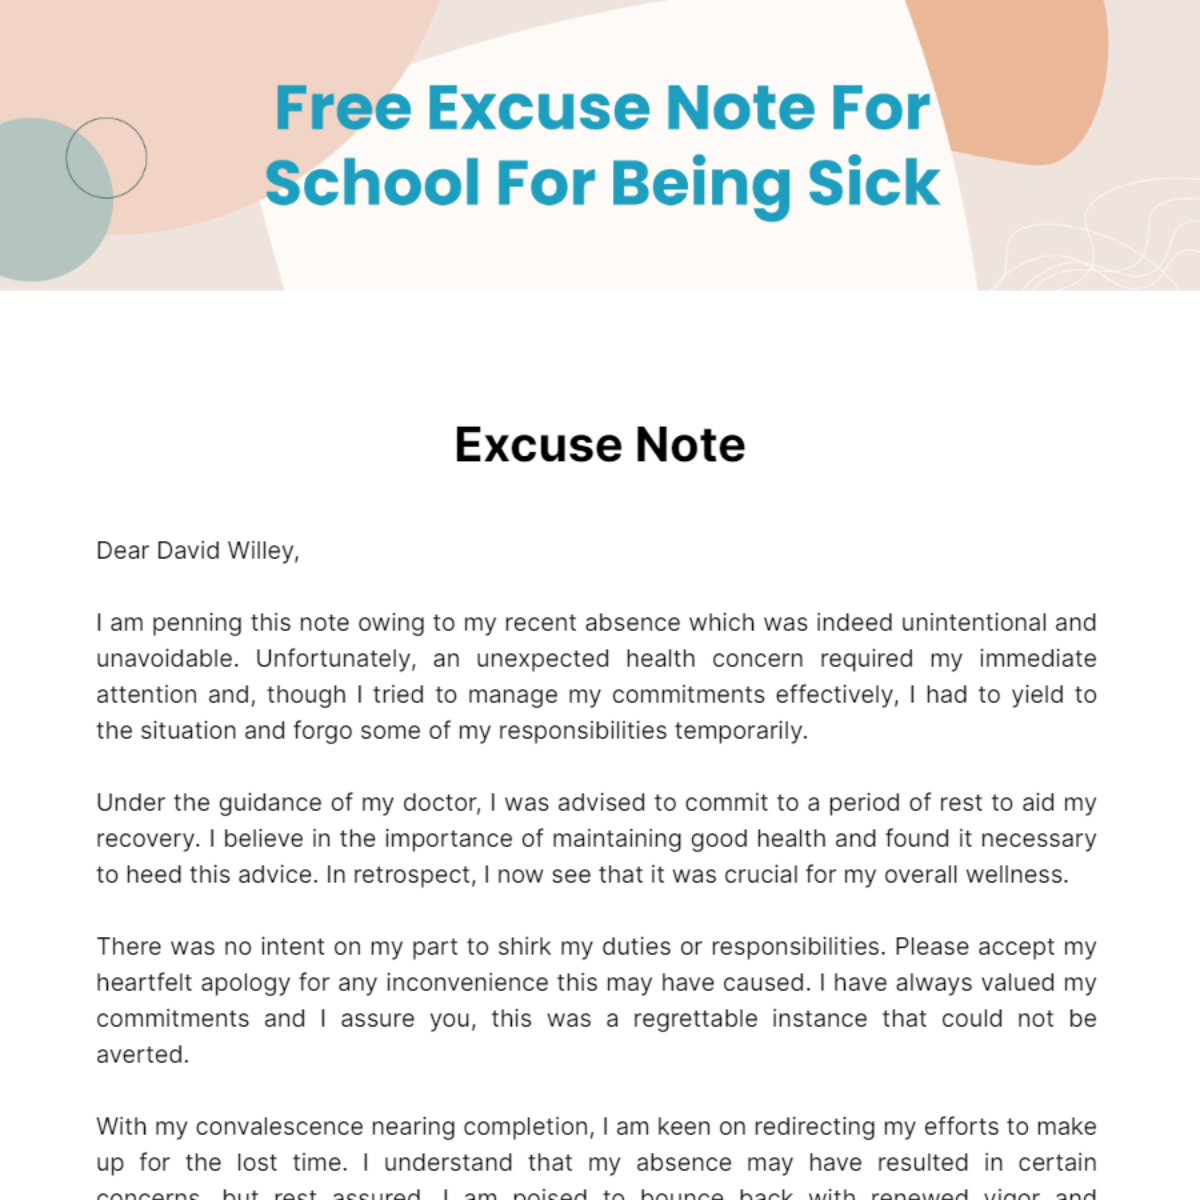 Free Excuse Note For School For Being Sick Template